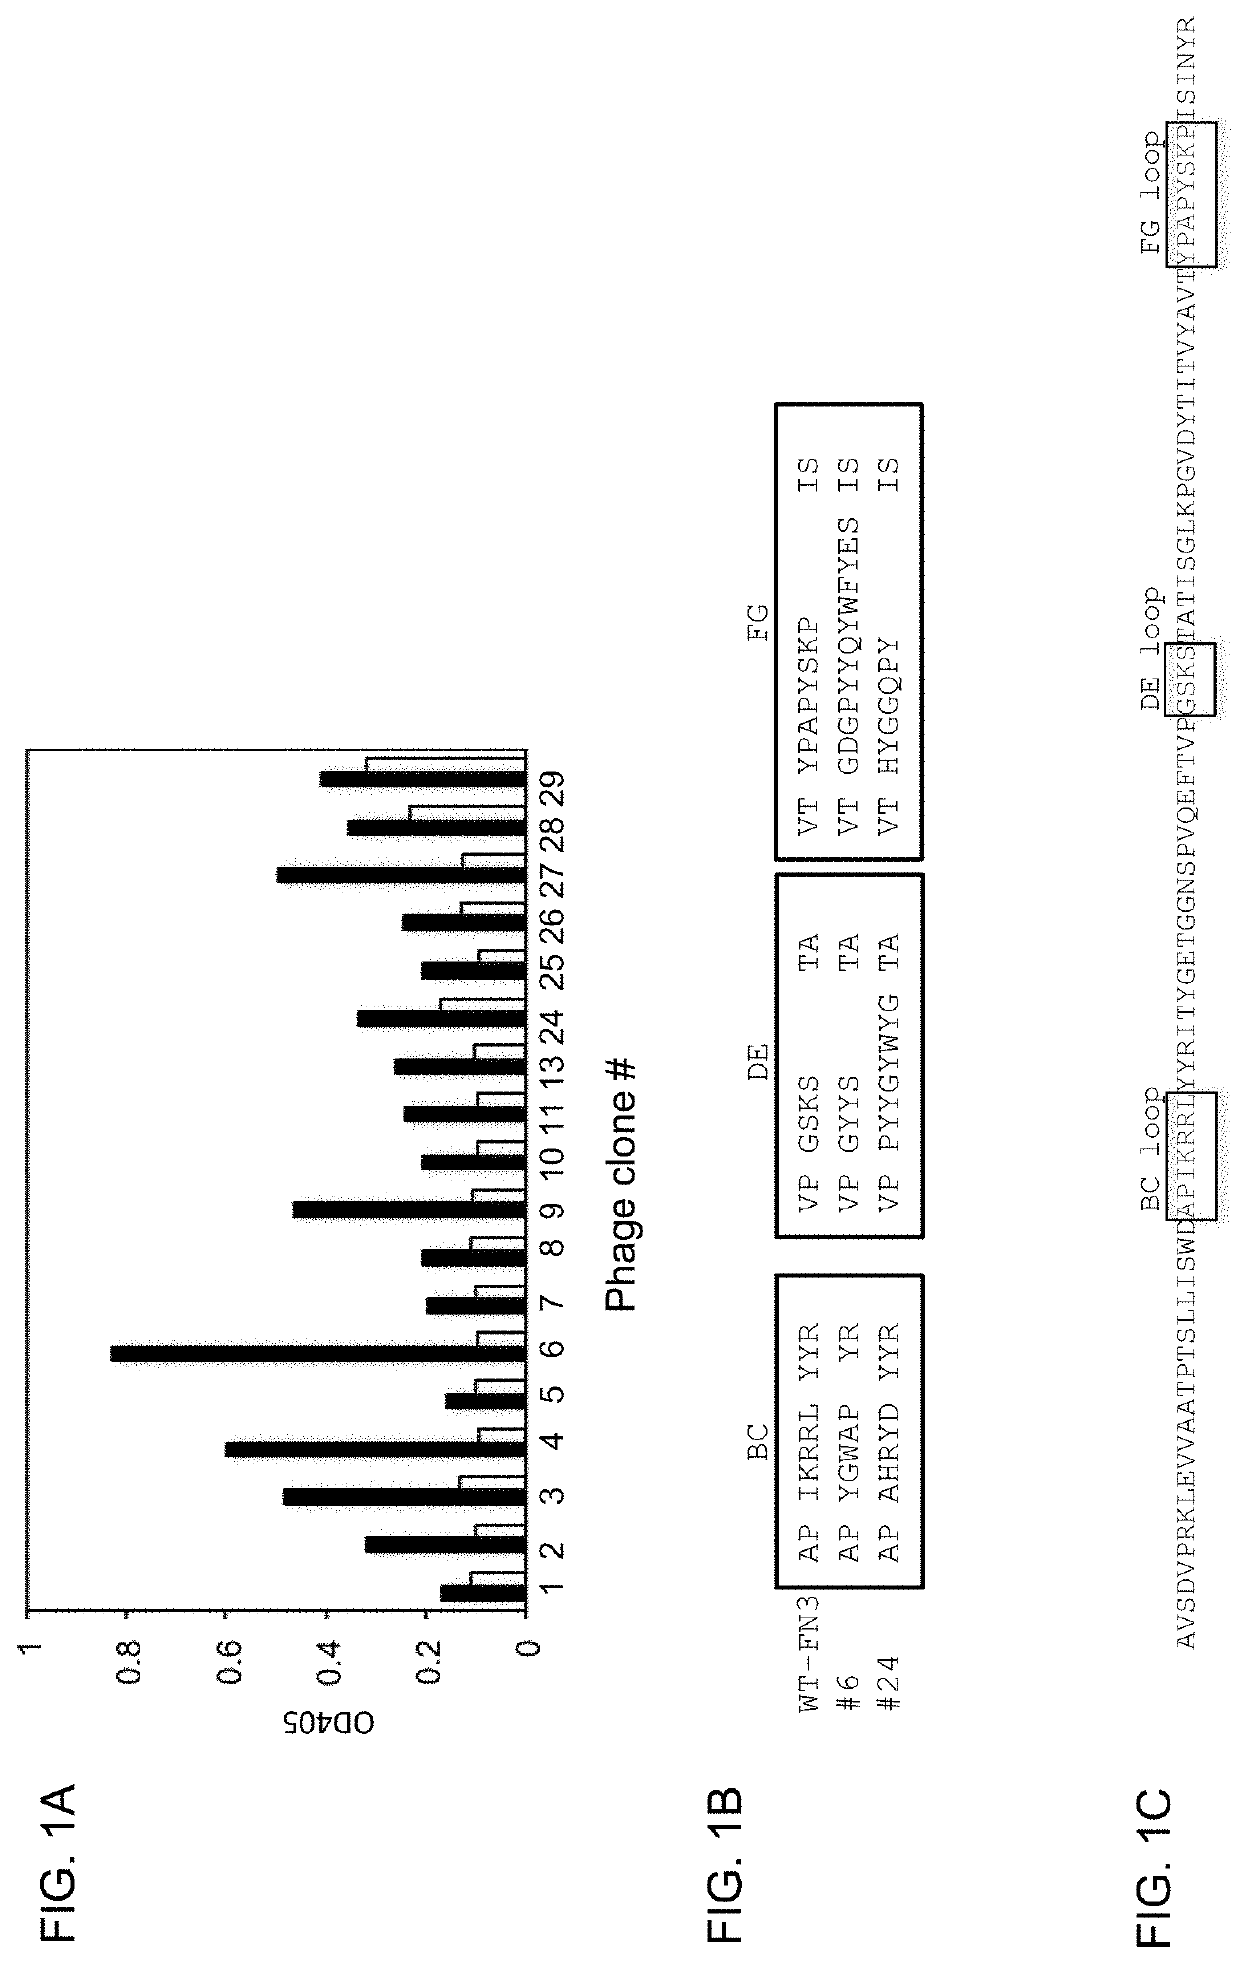 Antigen-specific reagents specific to active tgf-beta, methods of producing the same, and methods of use